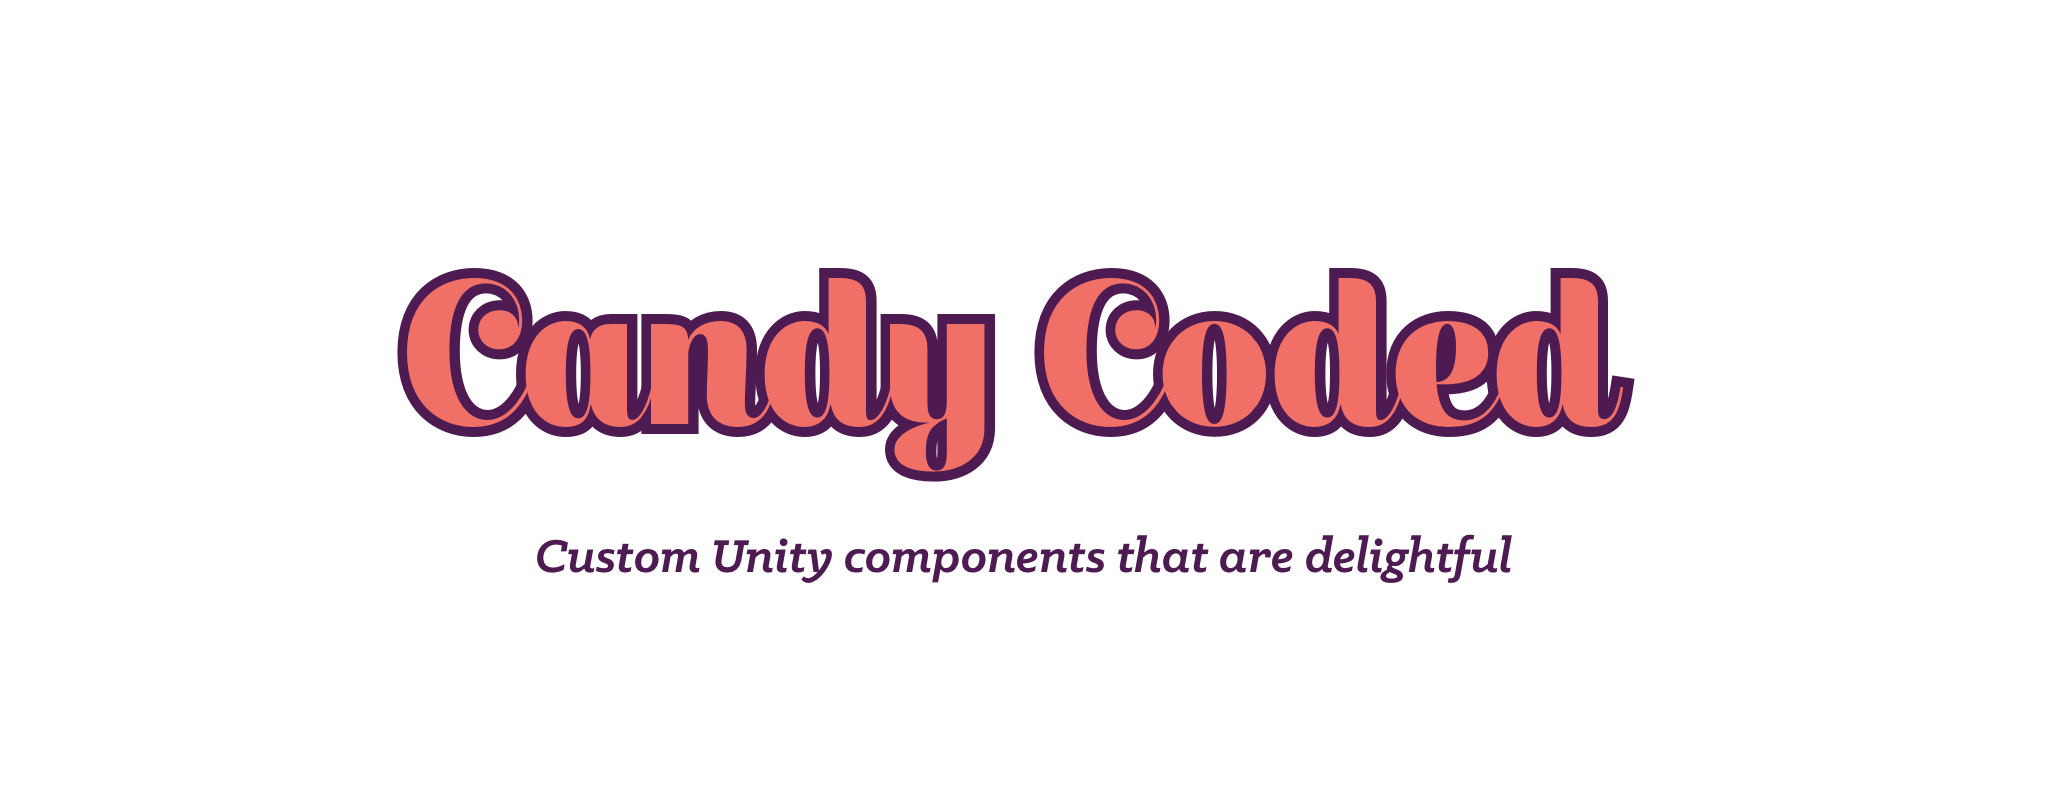 CandyCoded